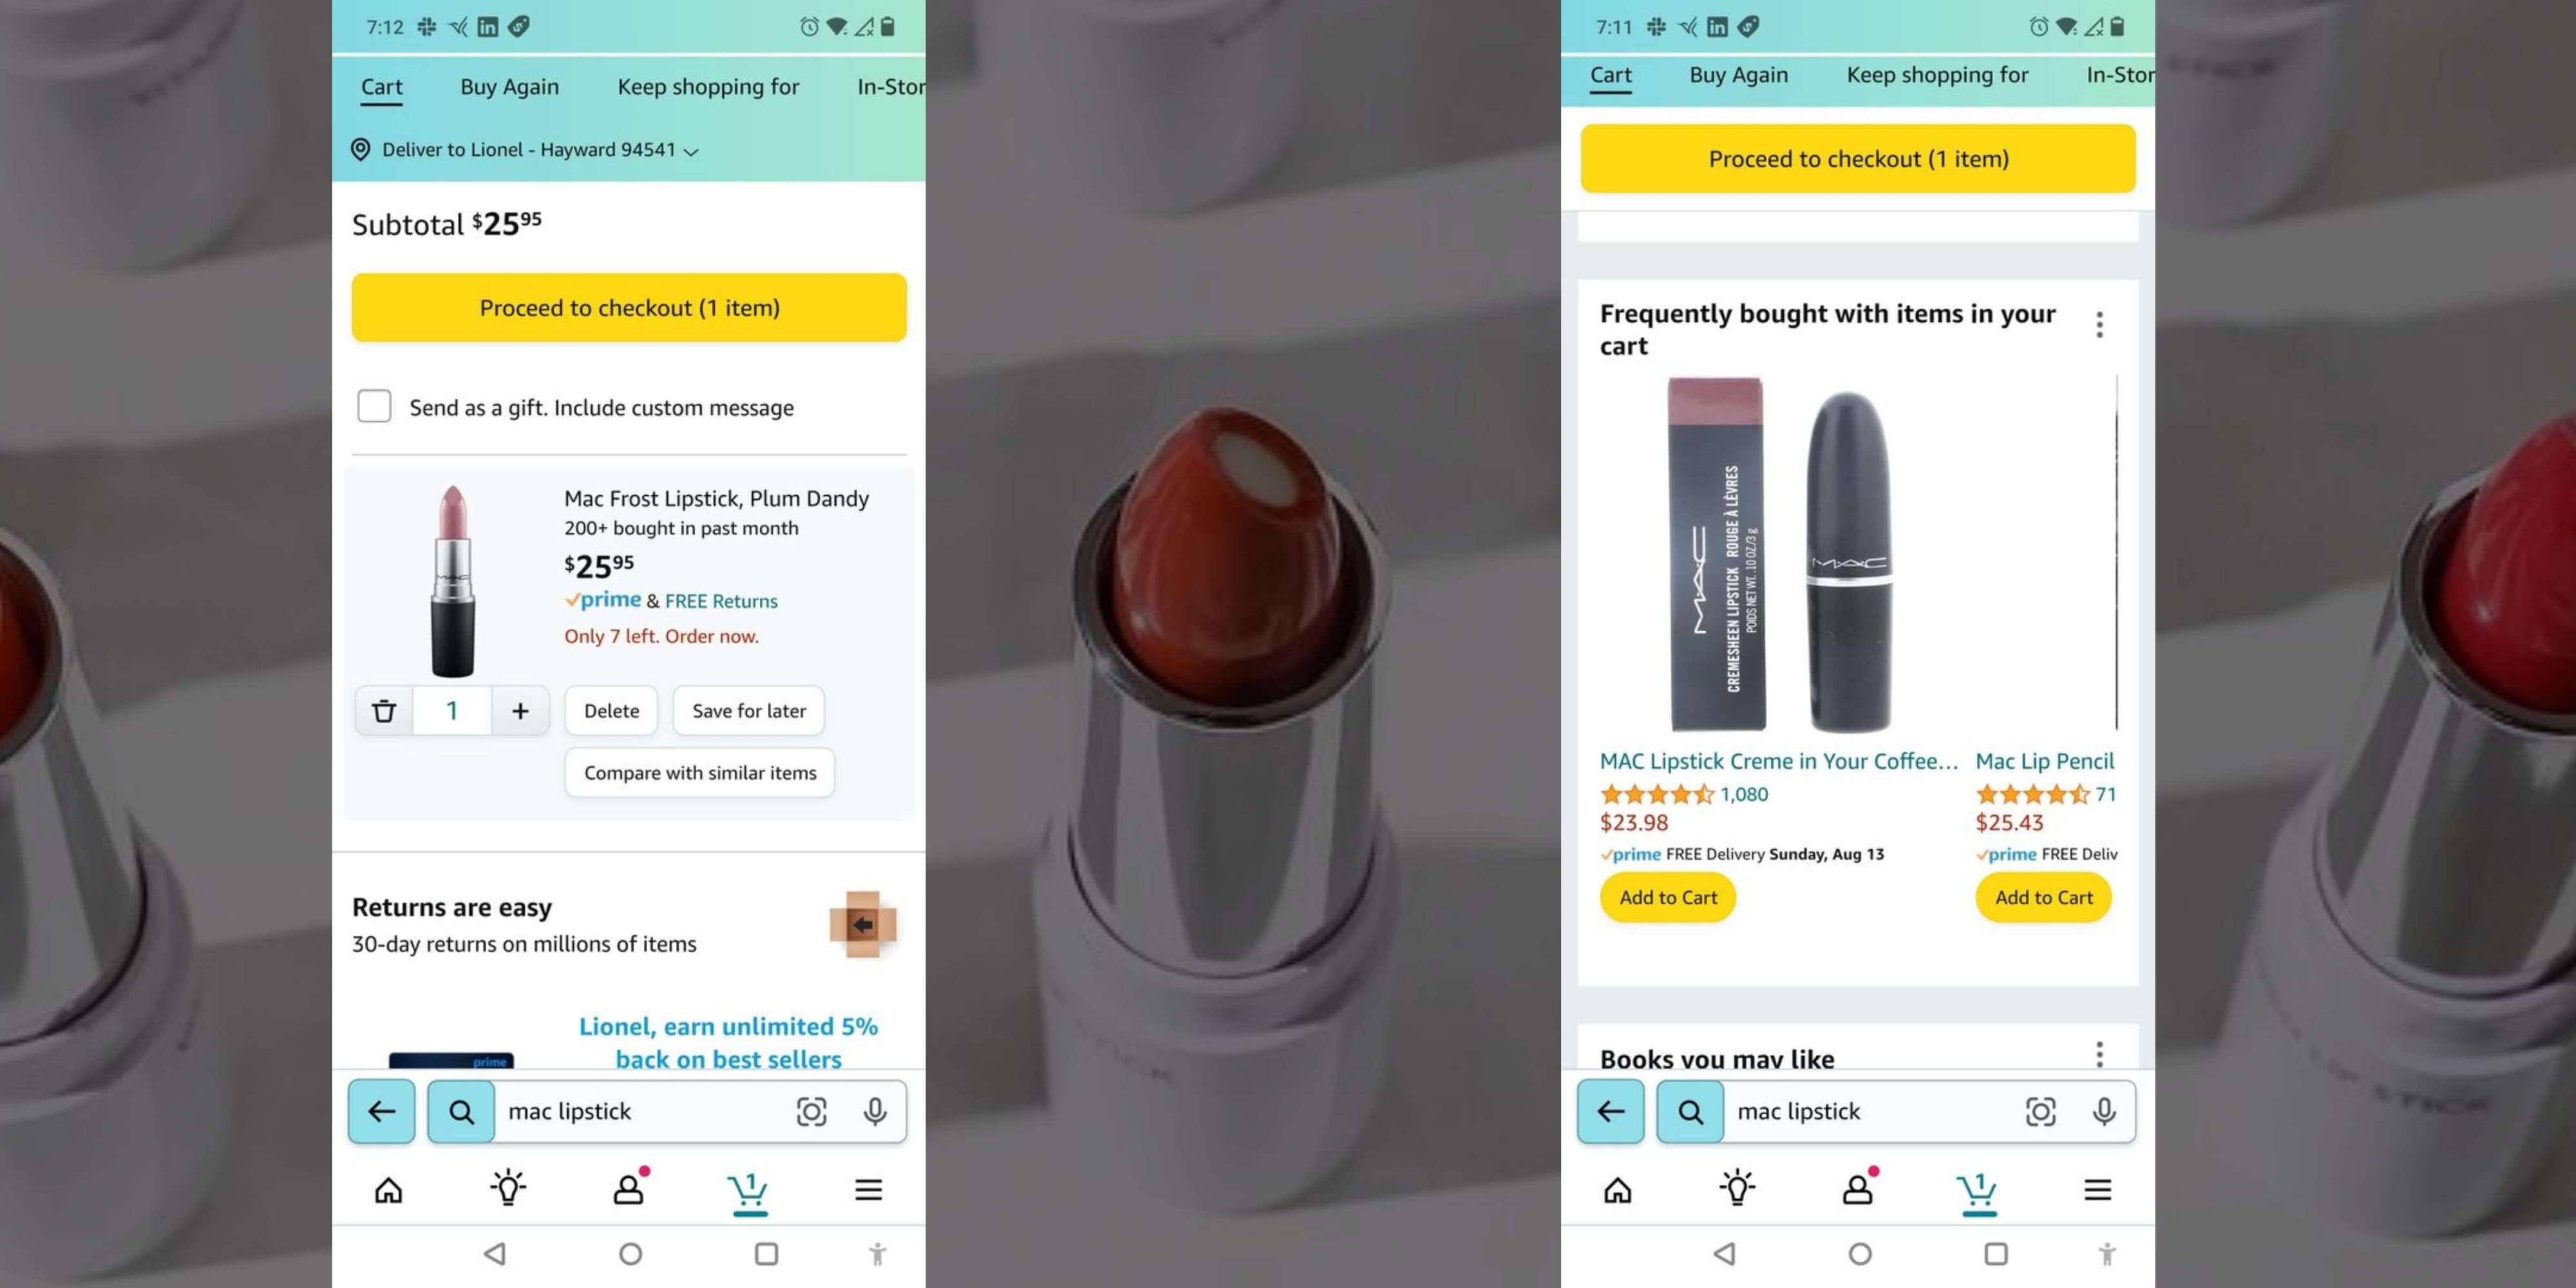 Screenshots of Amazon's shopping cart and how they personalize recommendations